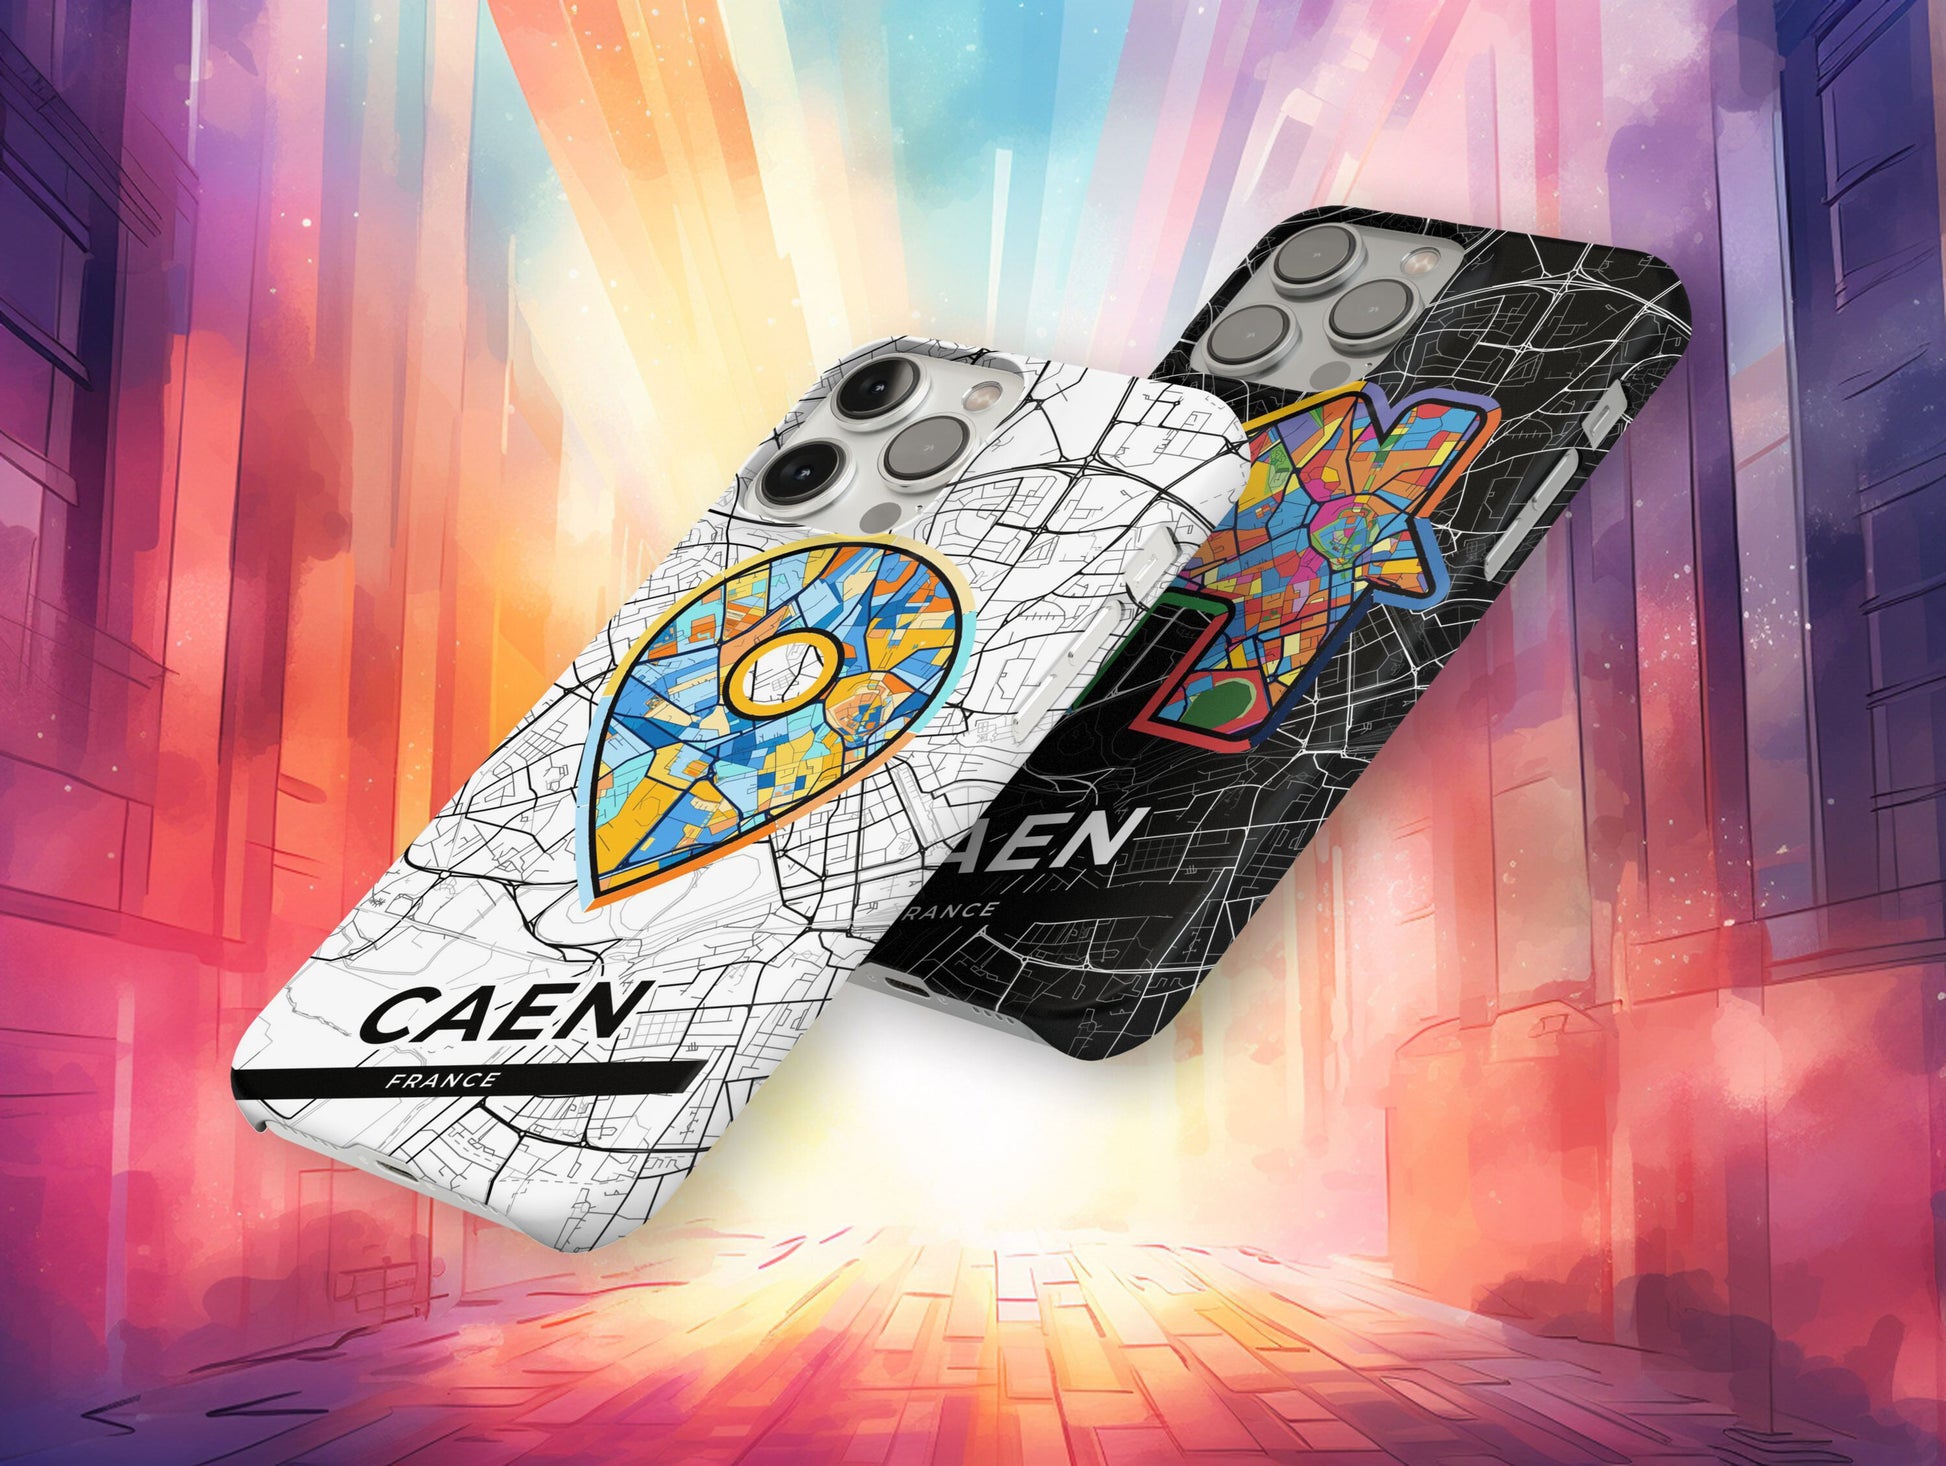 Caen France slim phone case with colorful icon. Birthday, wedding or housewarming gift. Couple match cases.